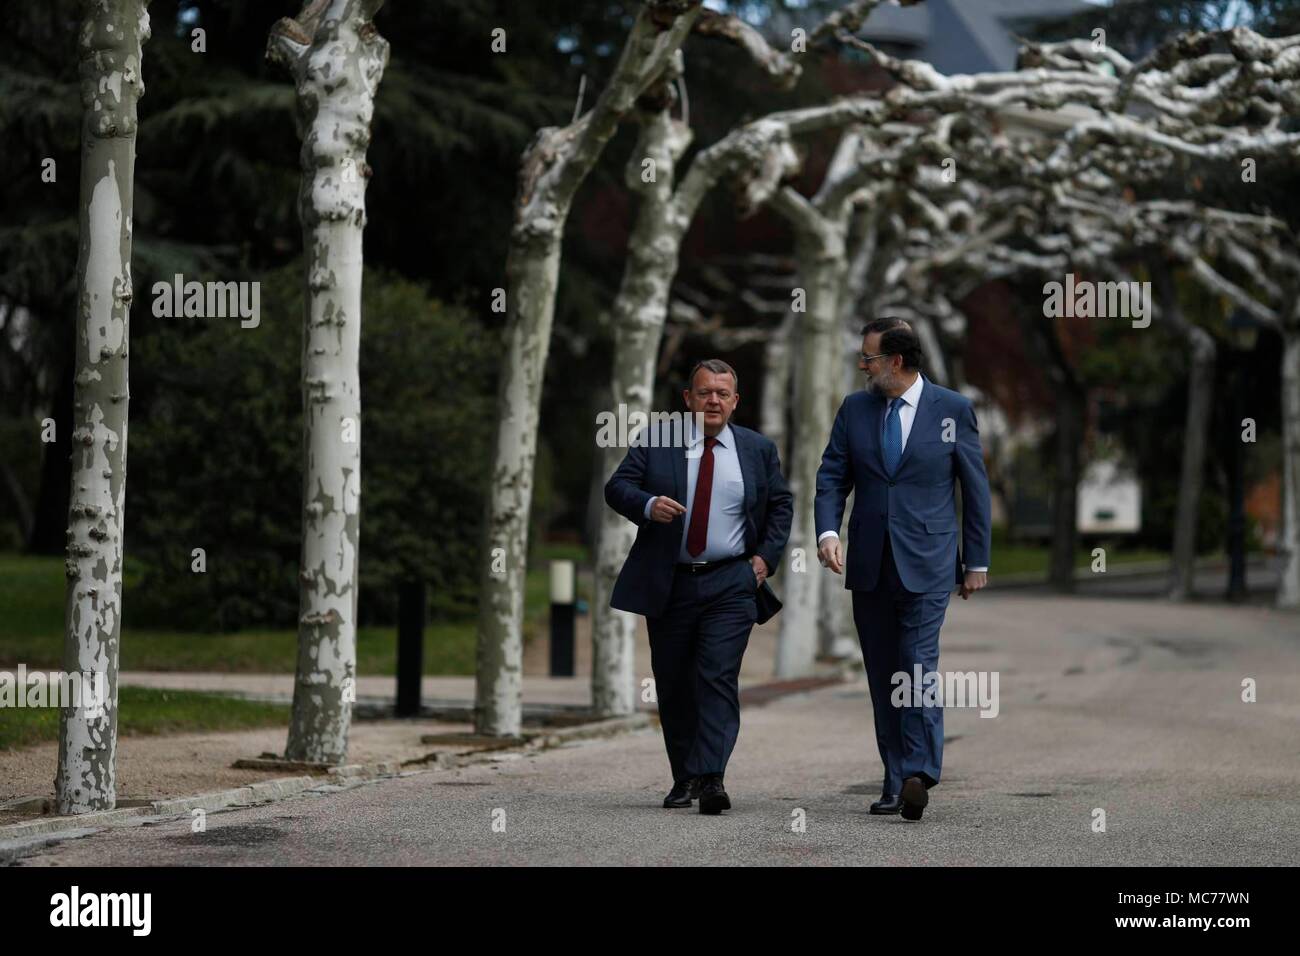 Spanish President Mariano Rajoy and Denmark Prime Minister, Lars Lokke Rasmussen  strolling through the garden of the Moncloa Palace on April 13, 2018 in Madrid.  Cordon Press/EP888 Stock Photo